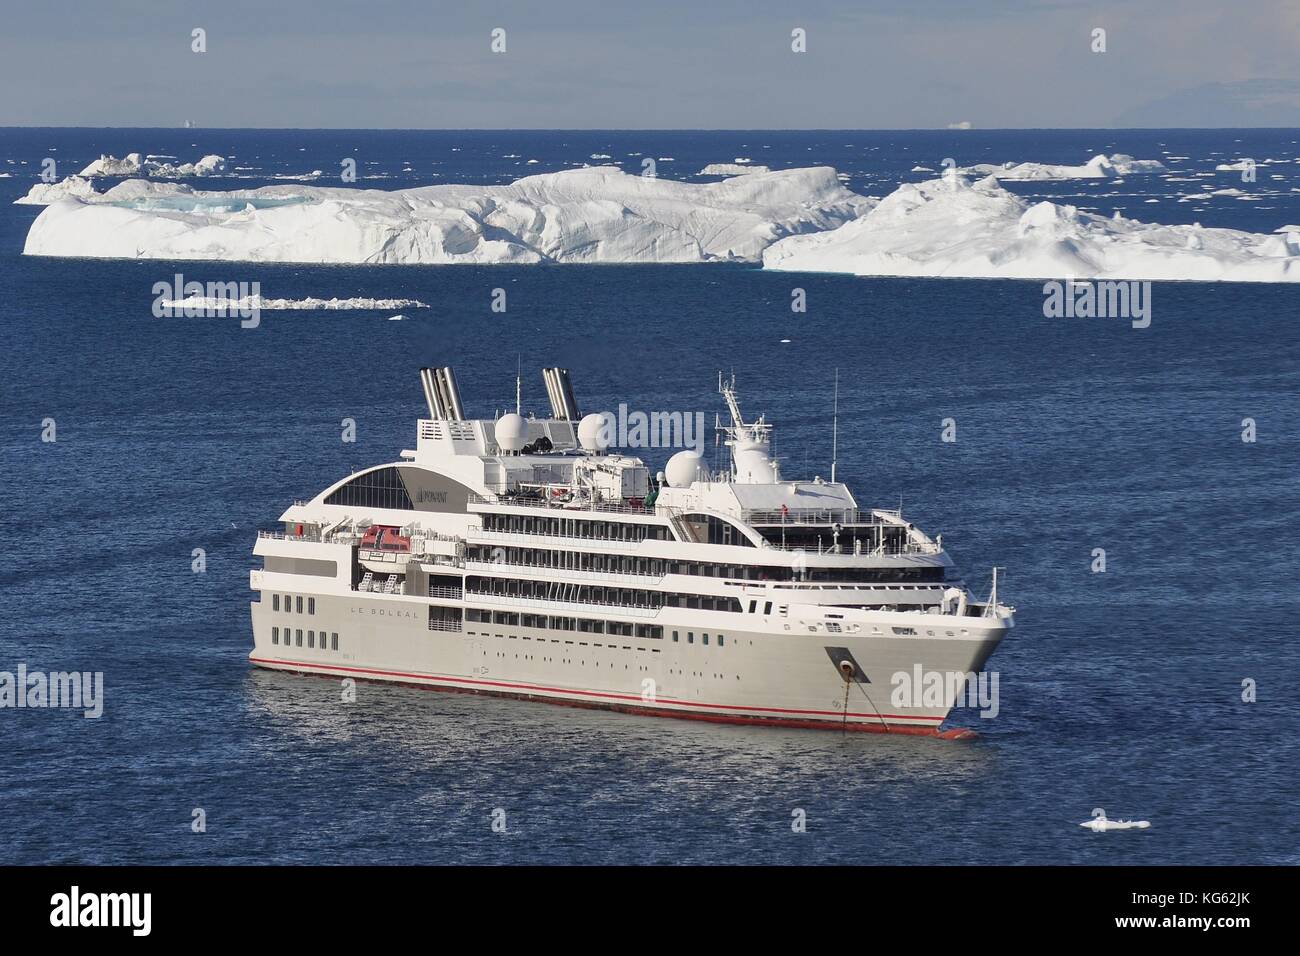 CRUISE SHIP LE SOLEAL NEGOTIATING THE ICEBERGS IN DISKO BAY, GREENLAND Stock Photo